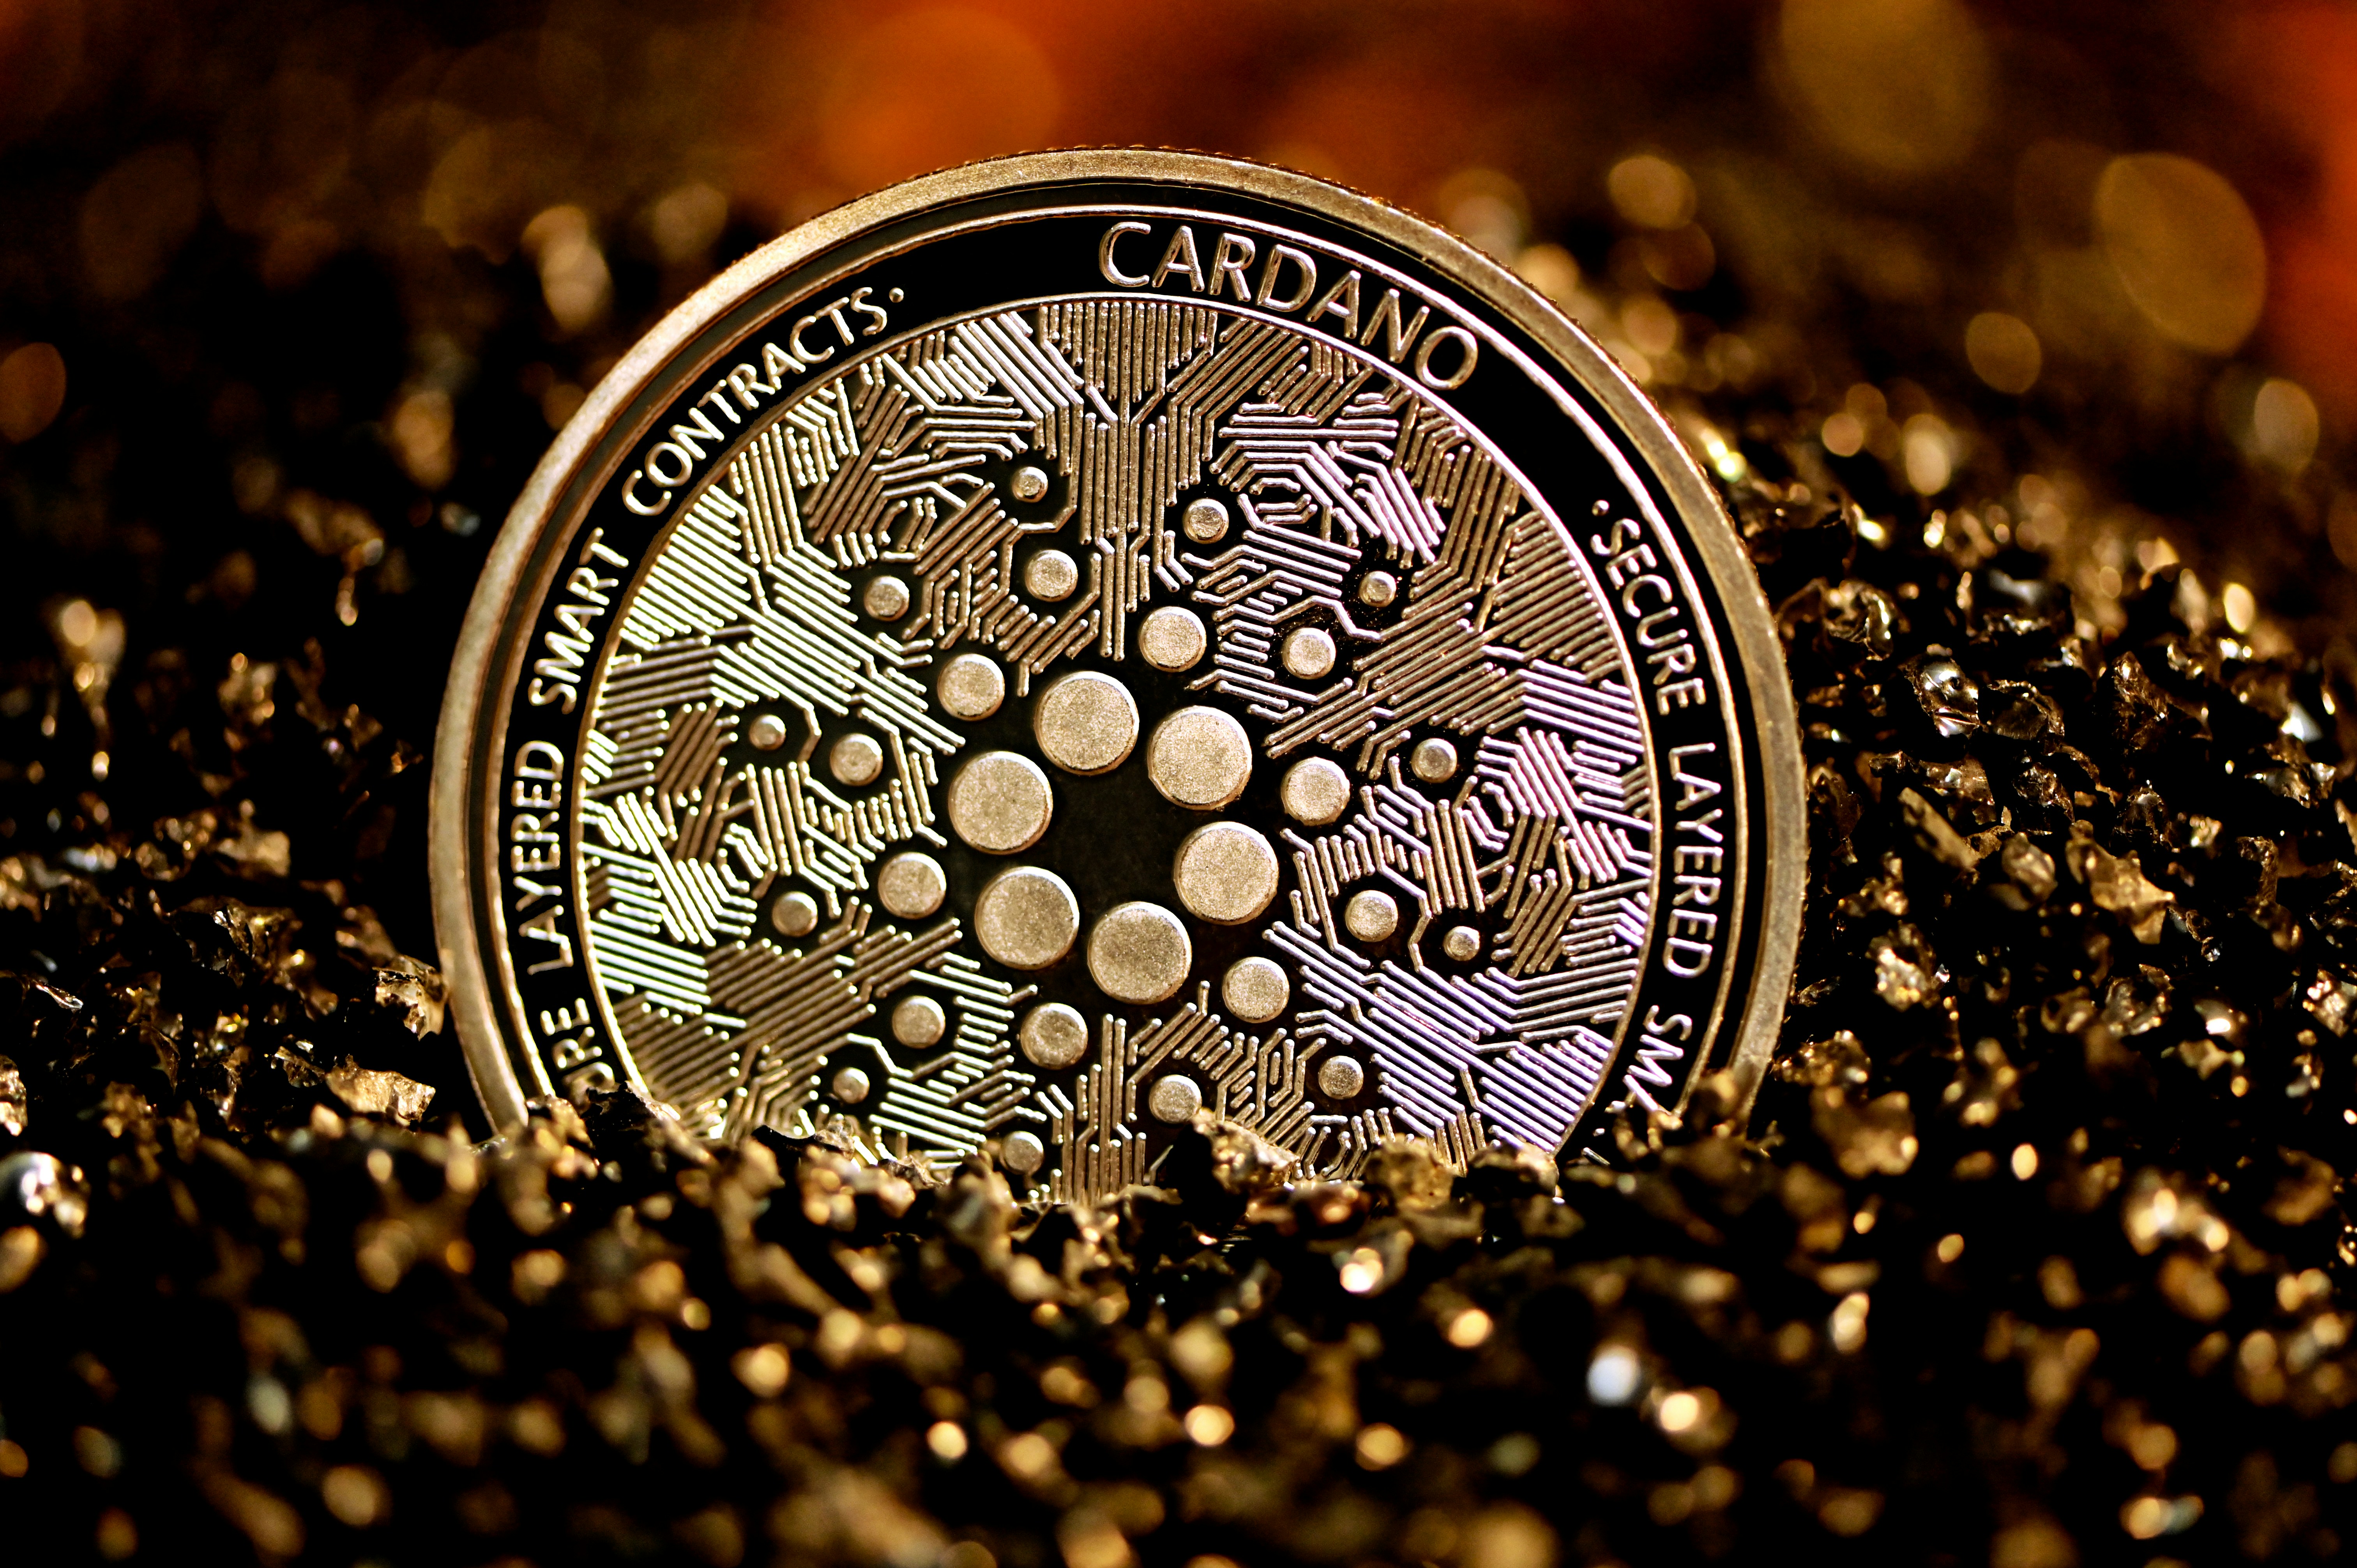 A silver Cardano (ADA) sticking out on a pile of black stones.